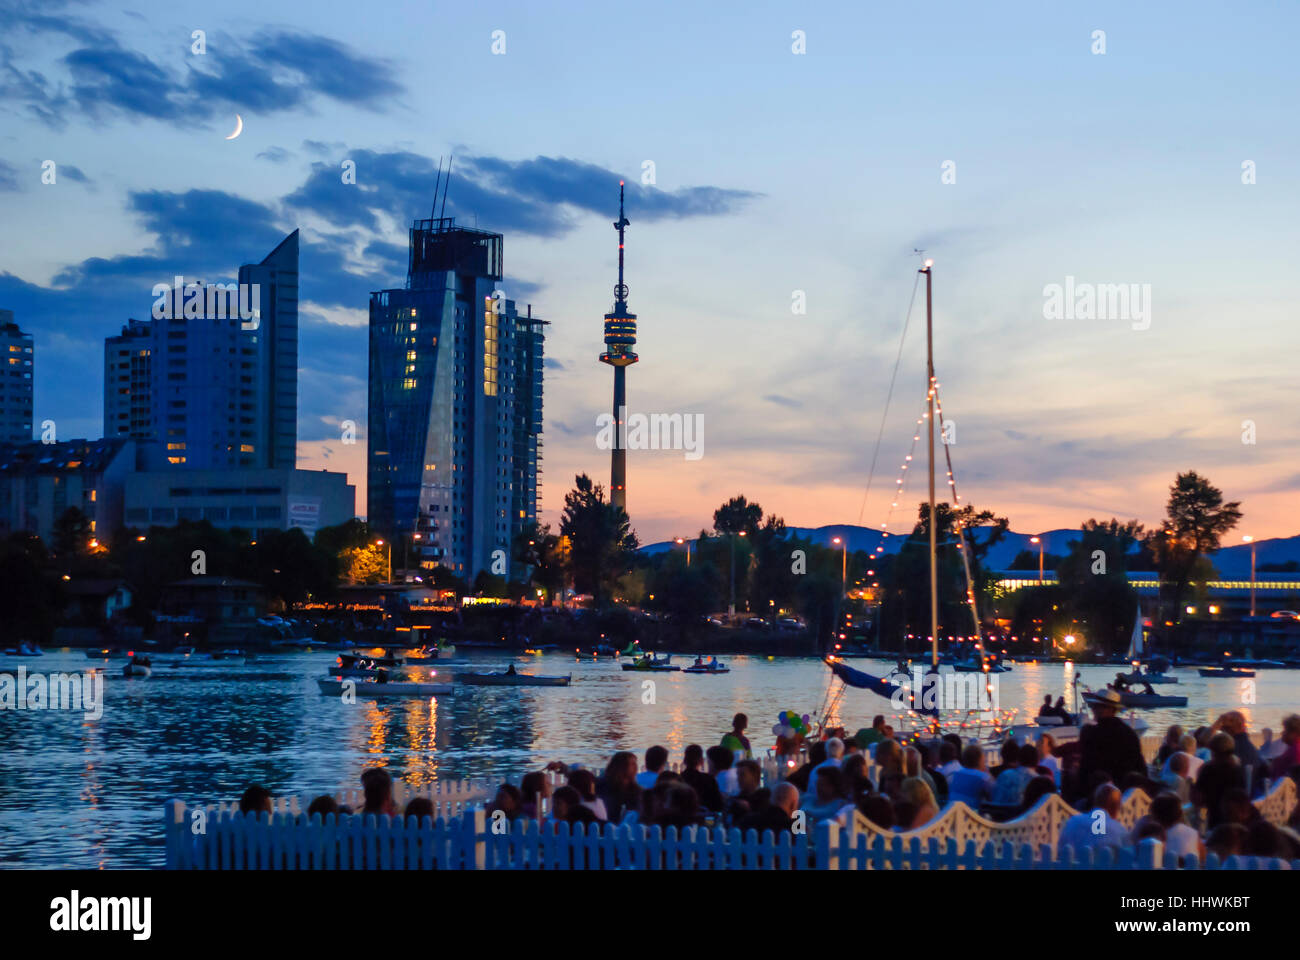 Wien, Vienna: Festival of lights on the Old Danube in front of the Donaucity and the Donauturm, 22., Wien, Austria Stock Photo